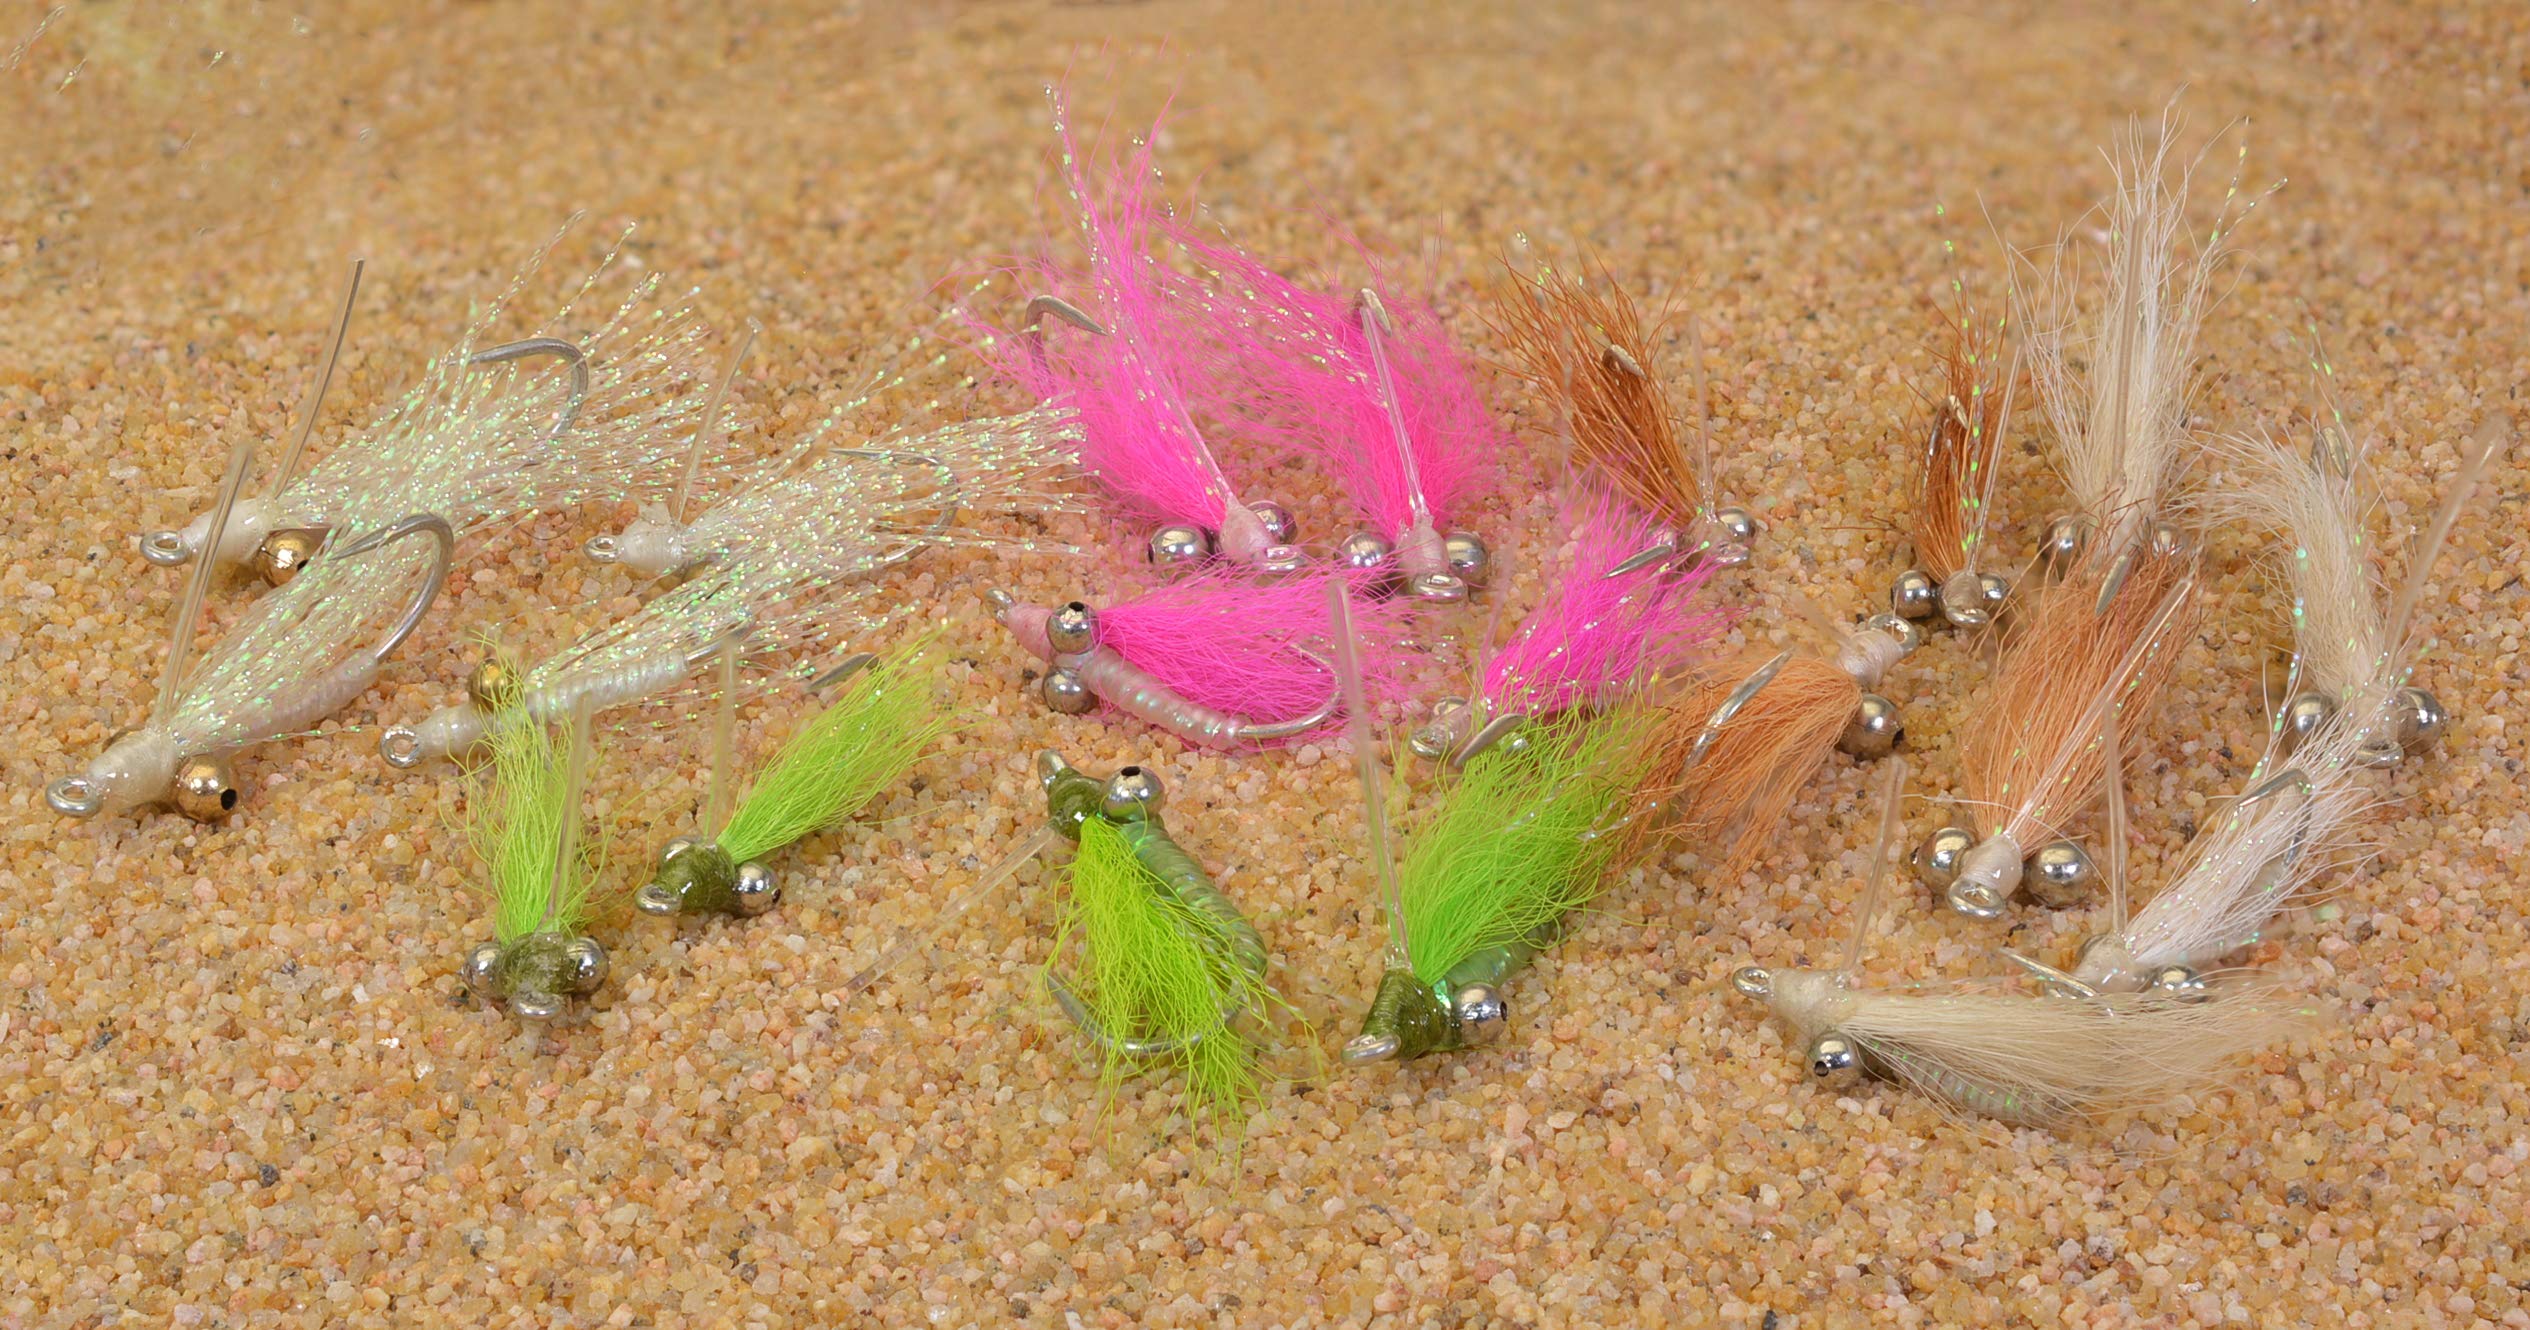 Crazy Charlie Saltwater Fly Fishing Flies - Choose from White, Pink,  Crystal, Tan & Chartreuse - Hand Tied